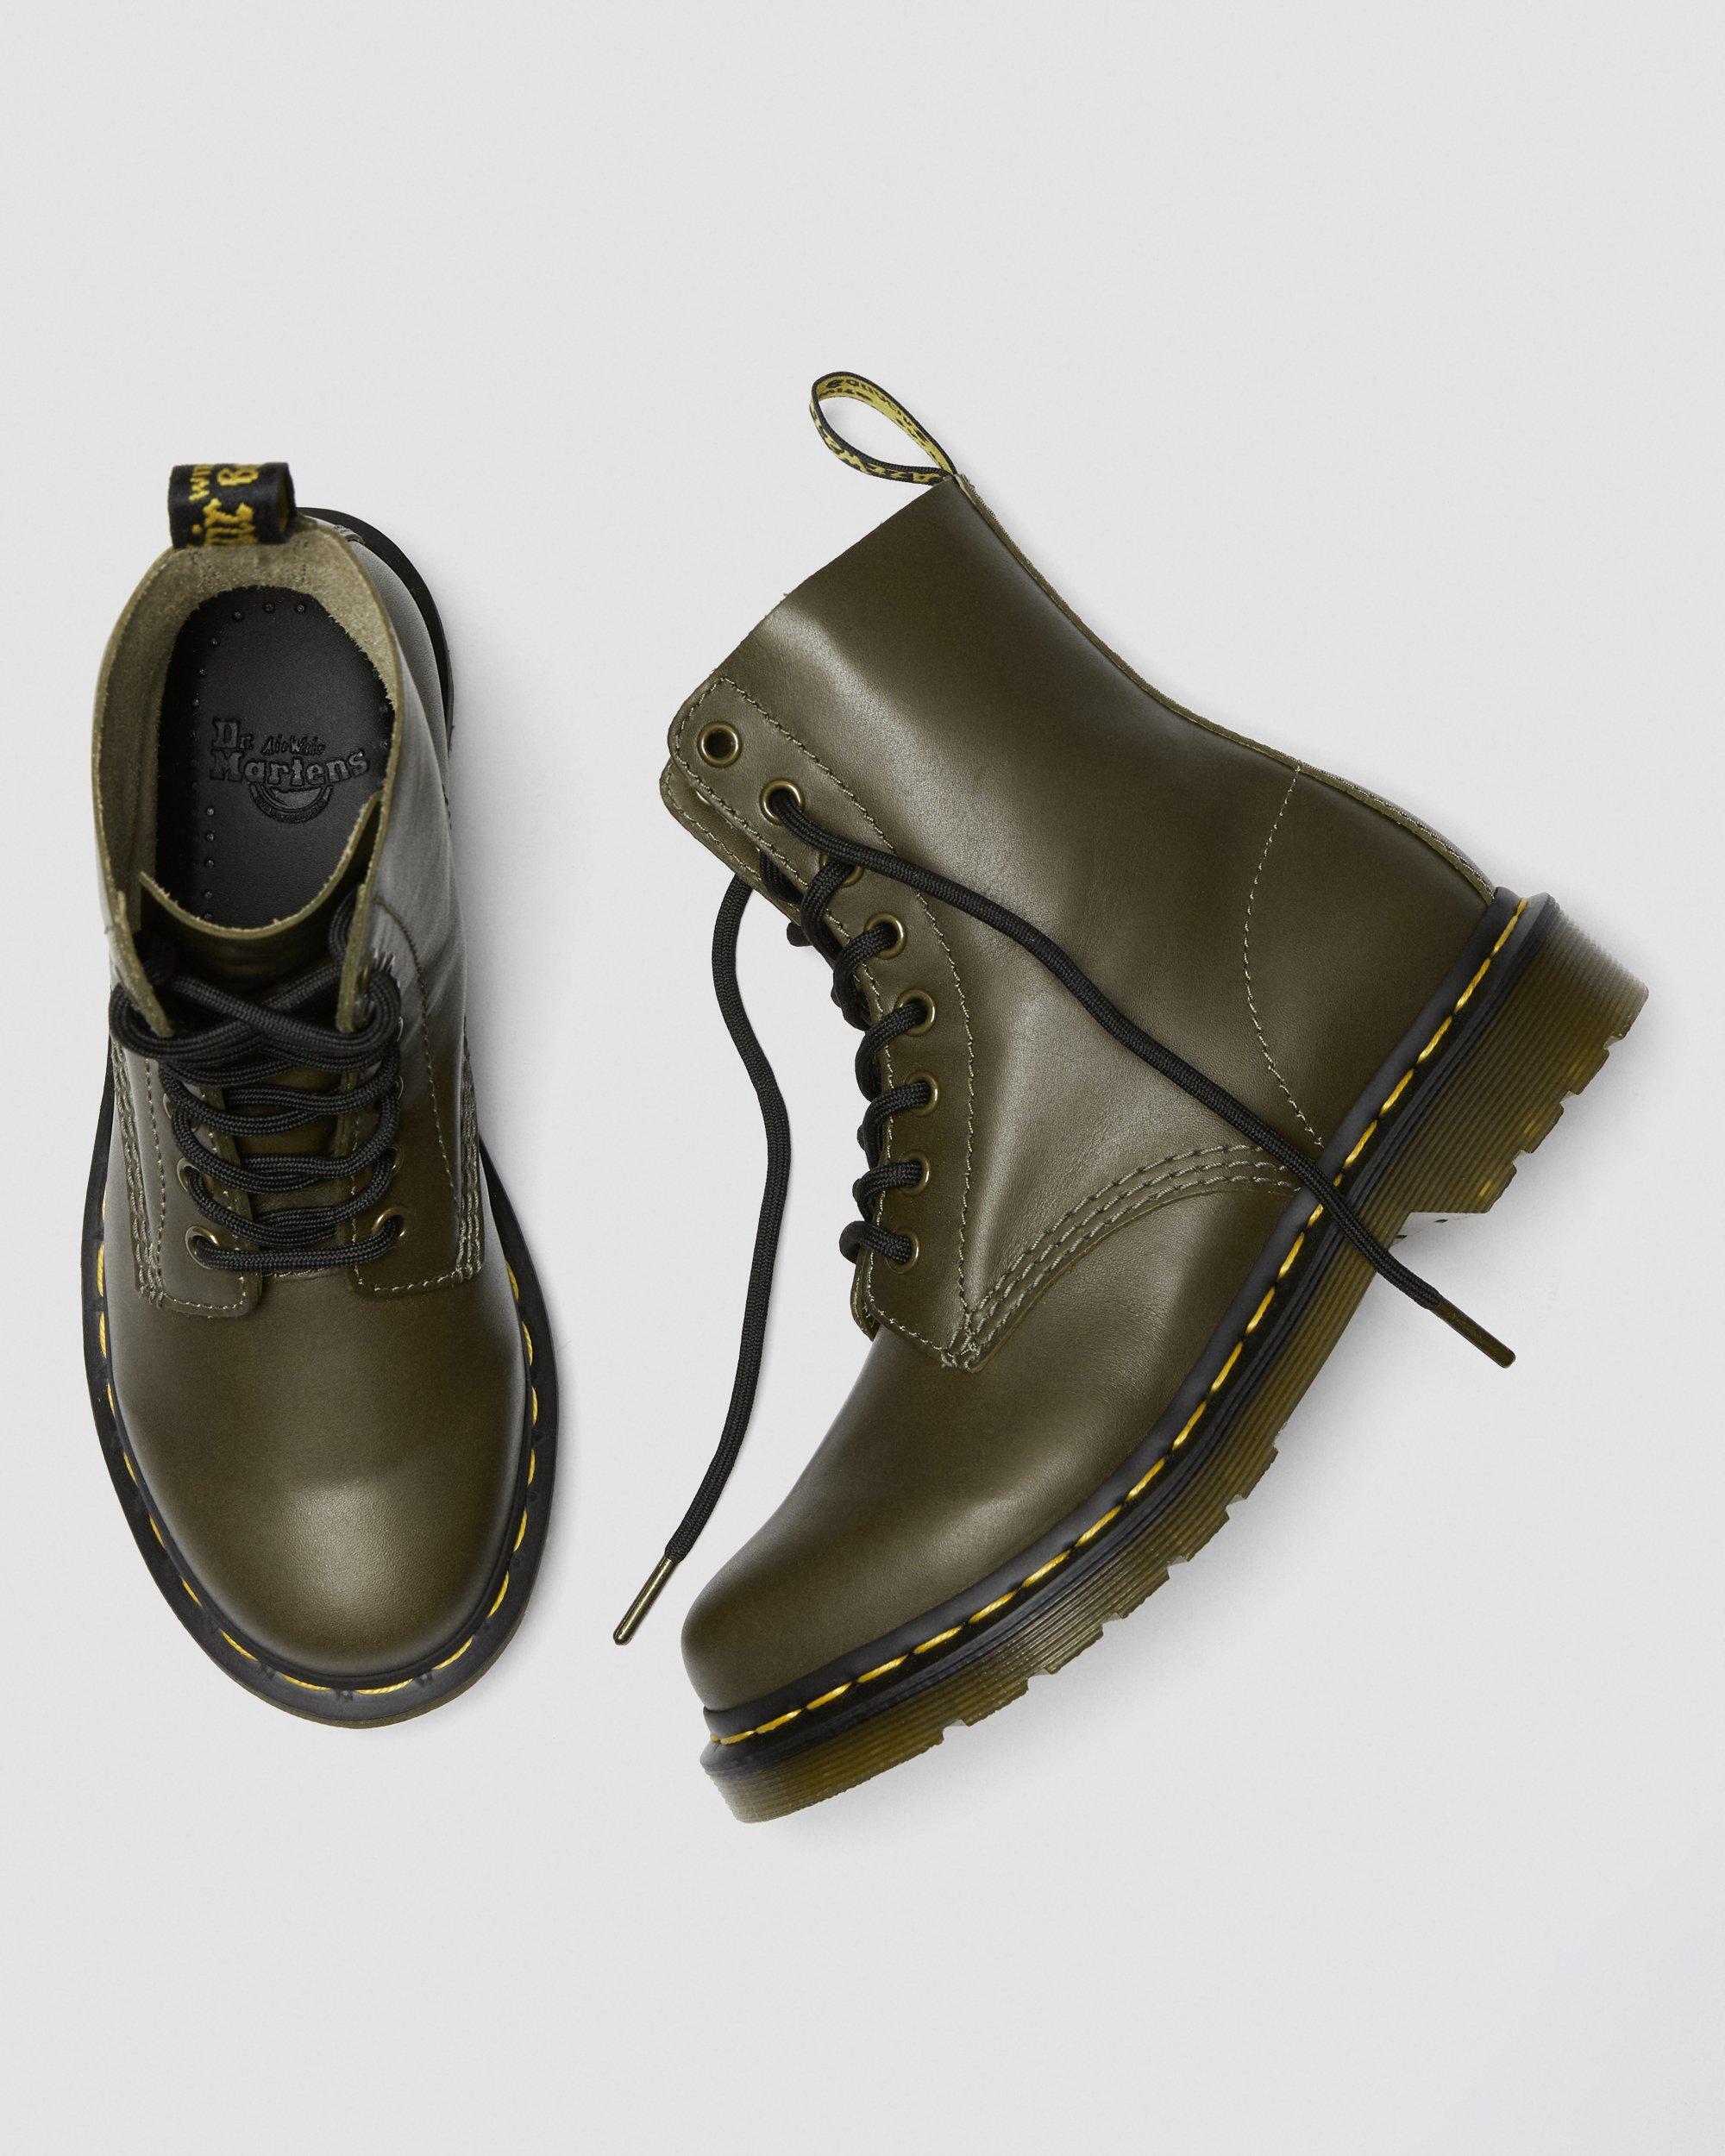 DR MARTENS 1460 Pascal Women's Wanama Leather Boots